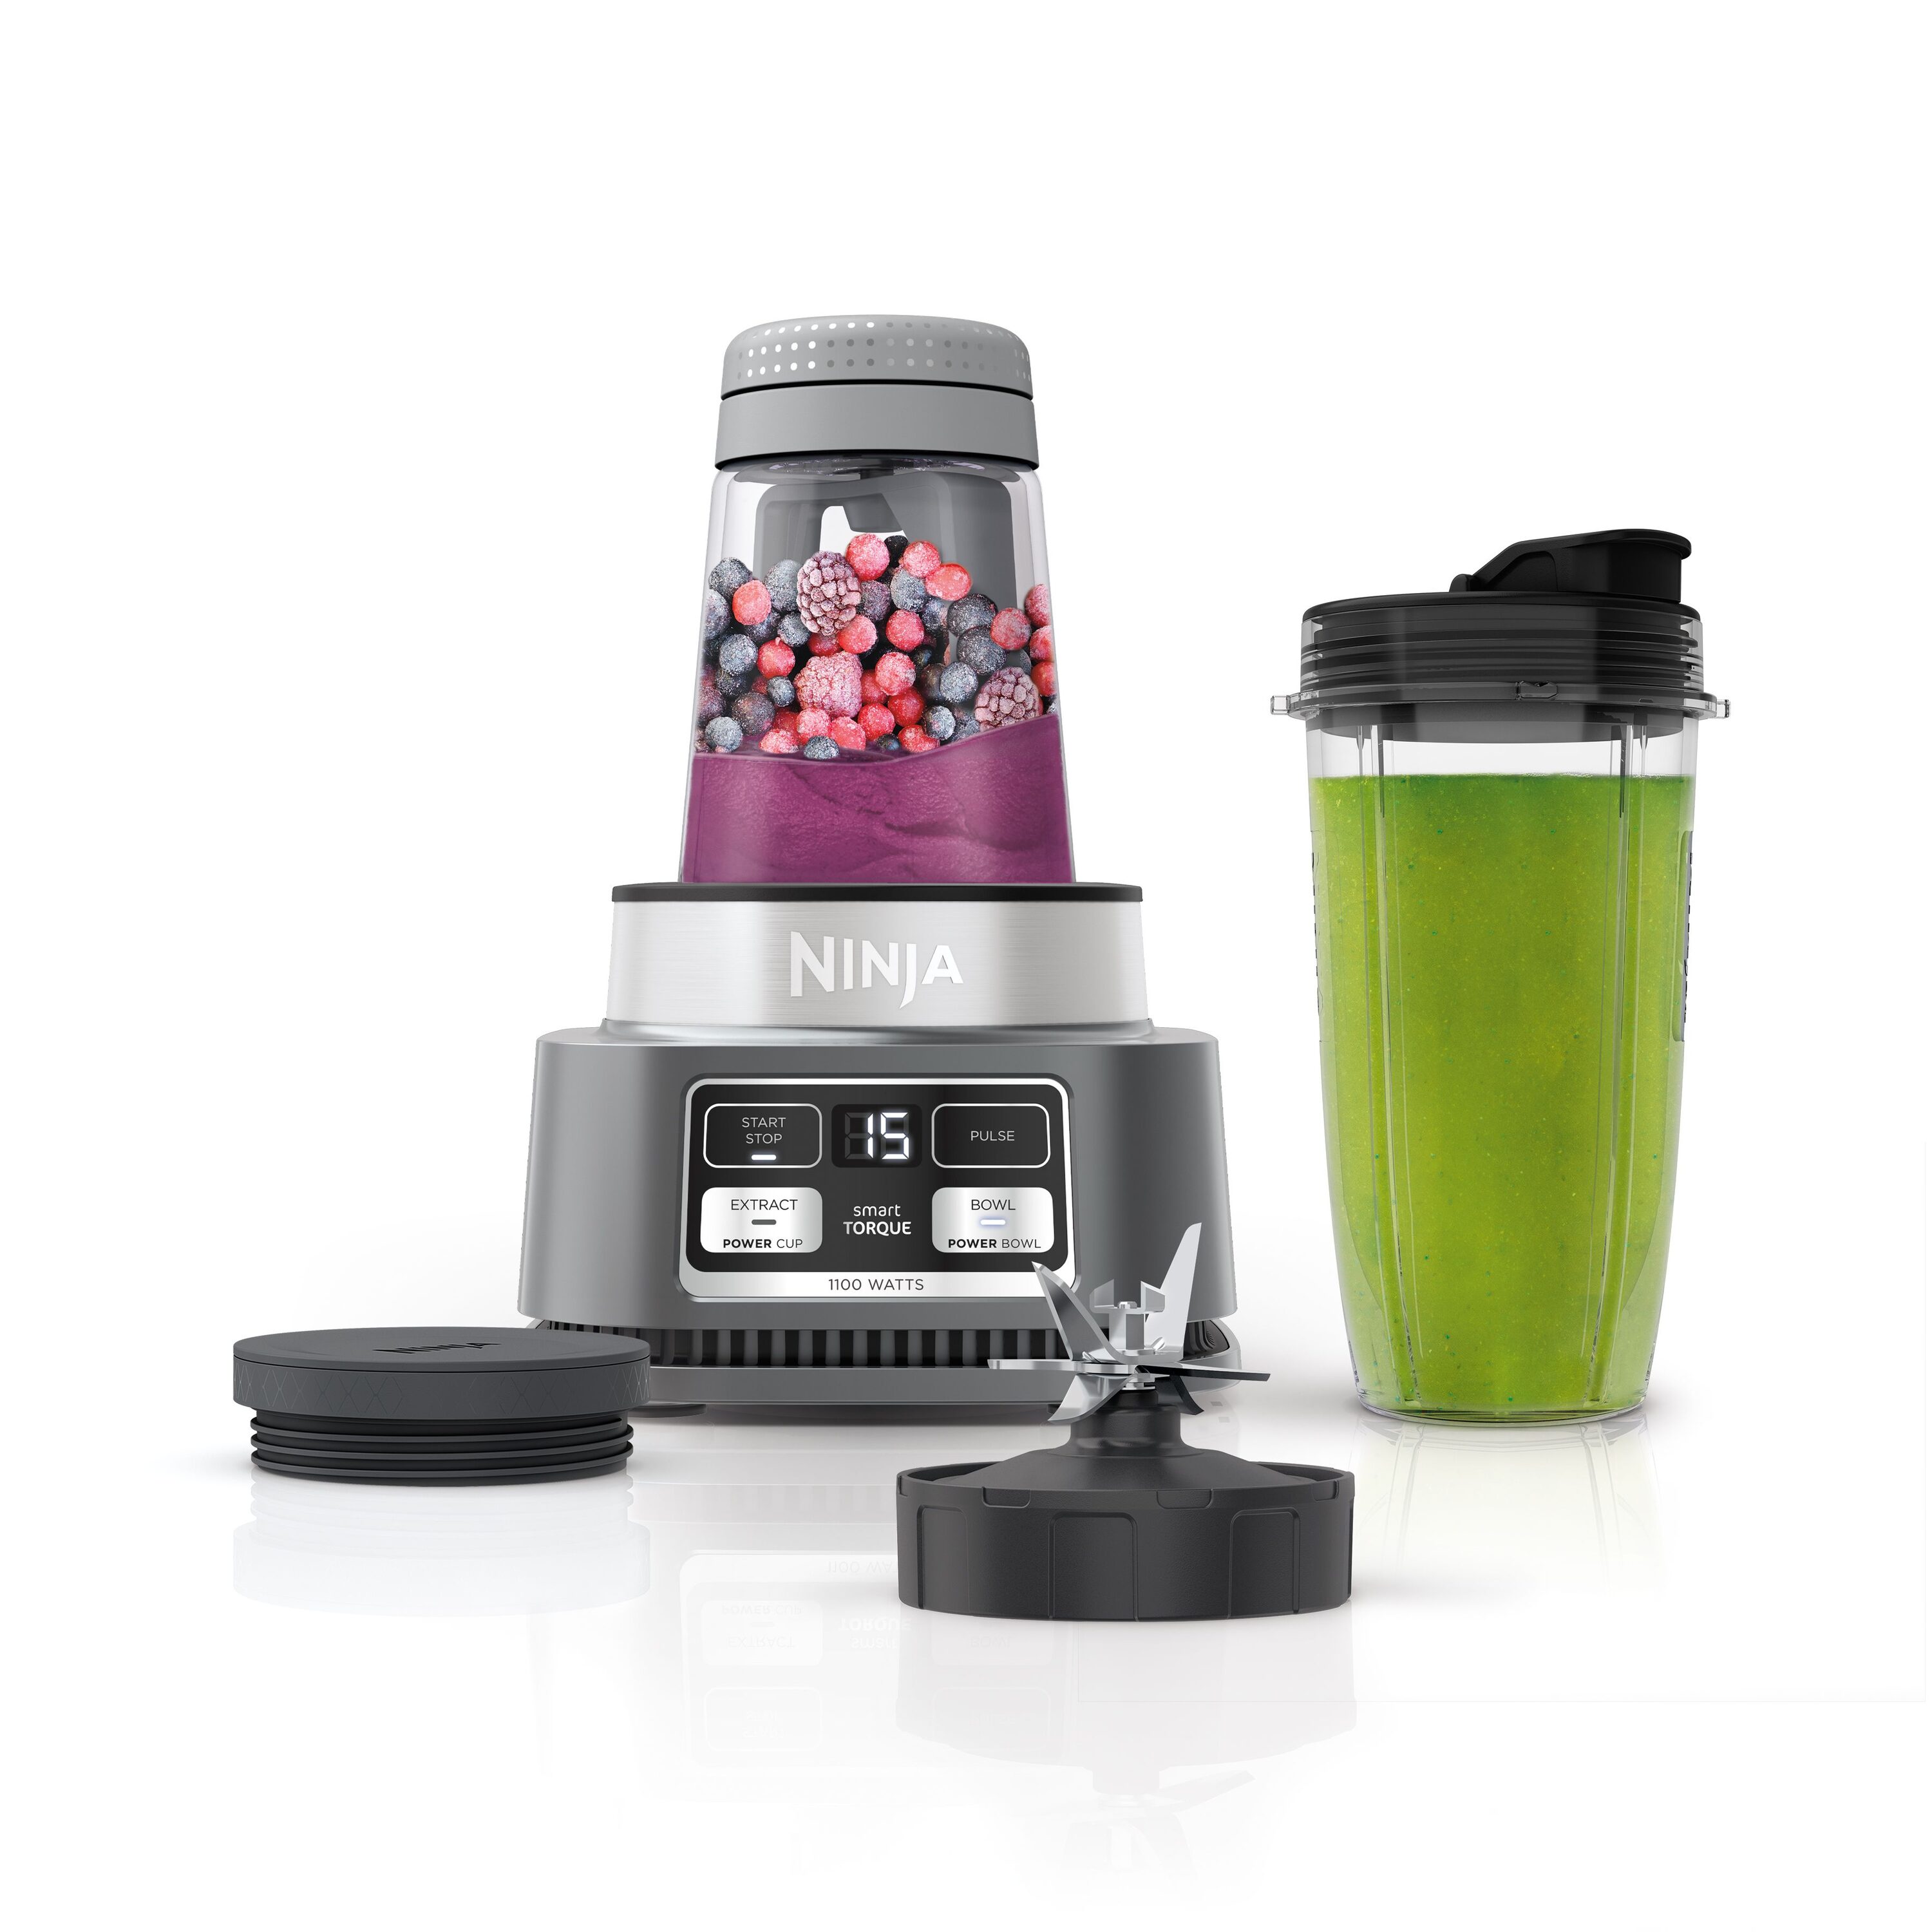 Ninja and Magic Bullet blenders on sale for $50 off at Walmart